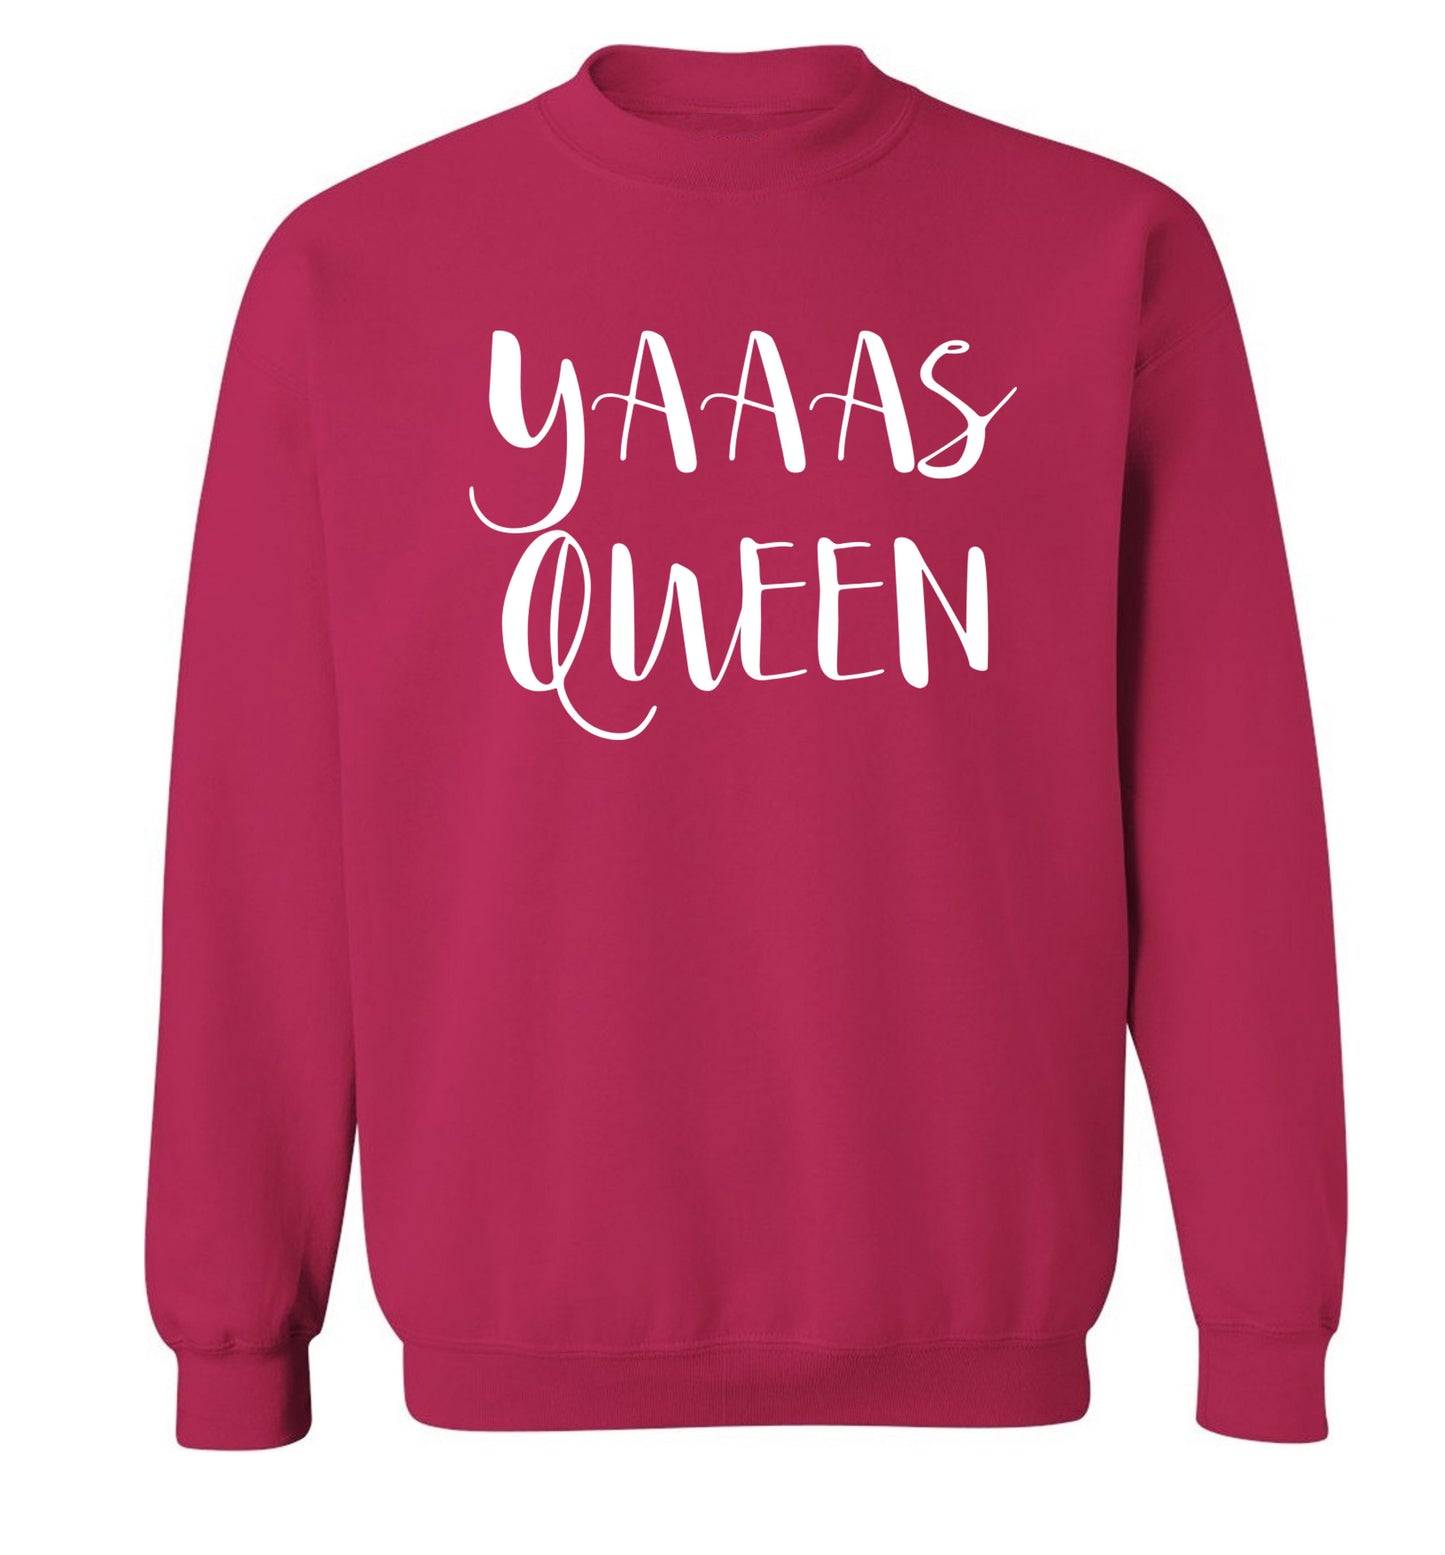 Yas Queen Adult's unisex pink Sweater XL